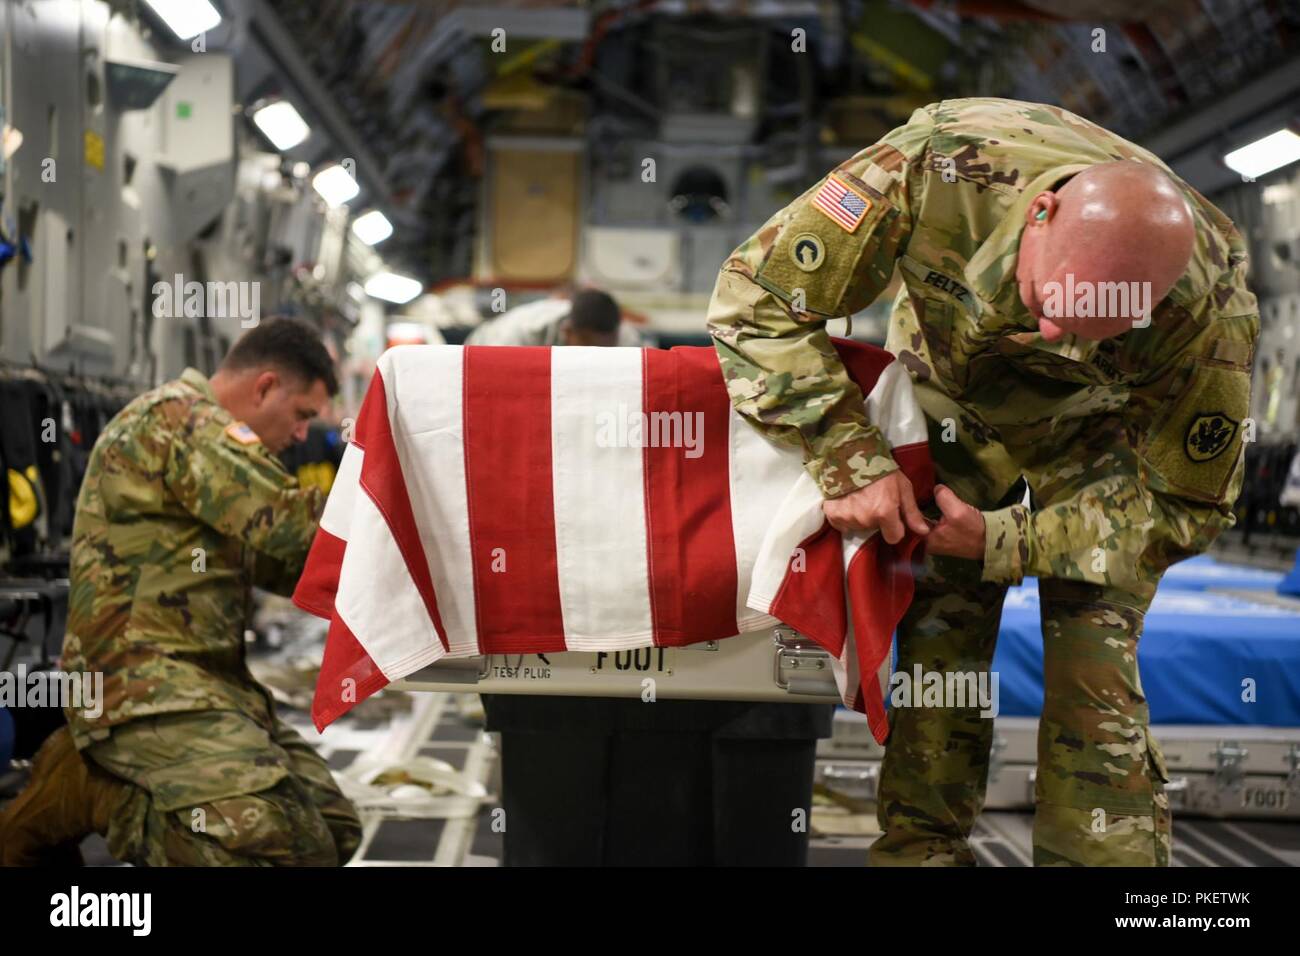 U.S. Army Staff Sgt. Marc Weyrick, left, and Sgt. 1st Class Eric Feltz, mortuary affairs specialists assigned to the Defense POW/MIA Accounting Agency (DPAA), secure a U.S. flag onto a transfer case aboard an Air Force C-17 Globemaster III en route to Joint Base Pearl Harbor-Hickam, Hawaii, from Osan Air Base, Republic of Korea, Aug. 1, 2018. The cases contain possible remains of service members lost during the Korean War and were transferred to DPAA's forensic laboratory in Hawaii to begin the identification process in support of the agency's mission to provide the fullest possible accounting Stock Photo